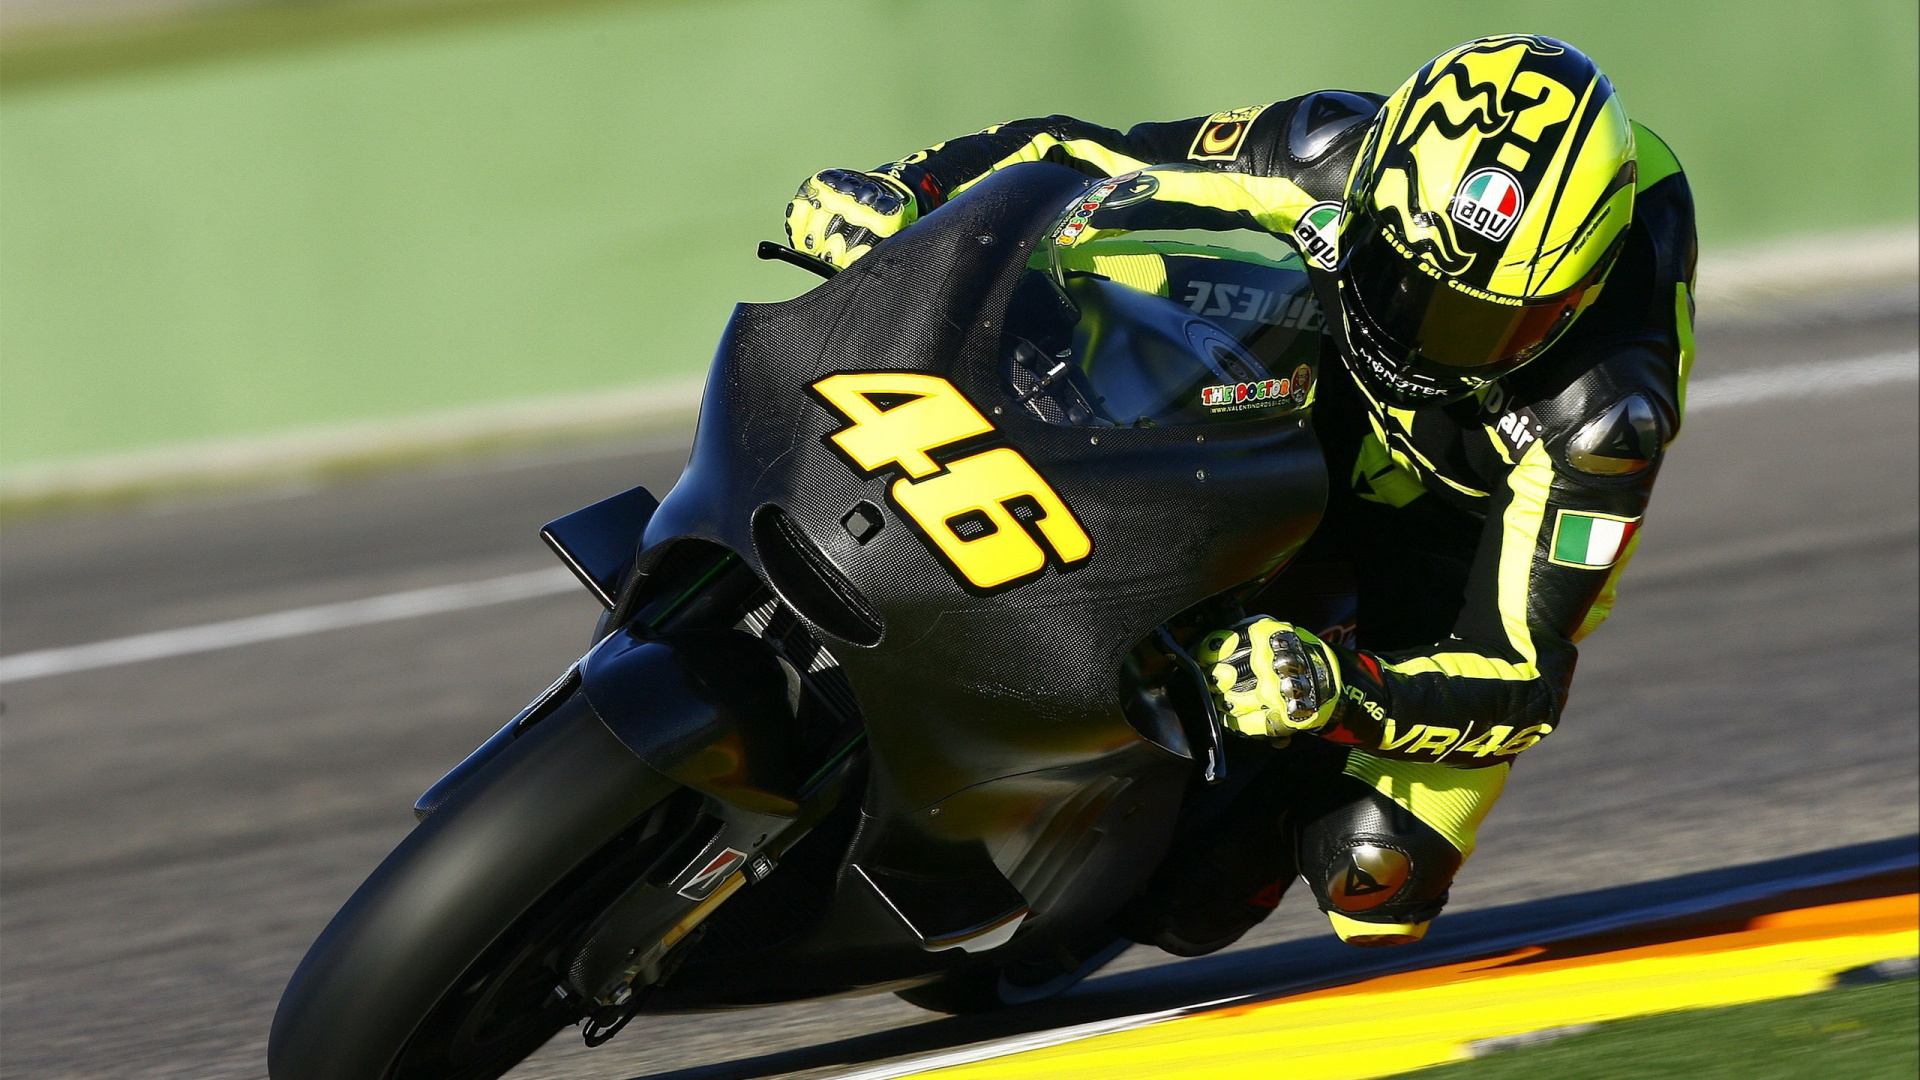 Man in Black and Yellow Helmet Riding on Black and Yellow Sports Bike. Wallpaper in 1920x1080 Resolution